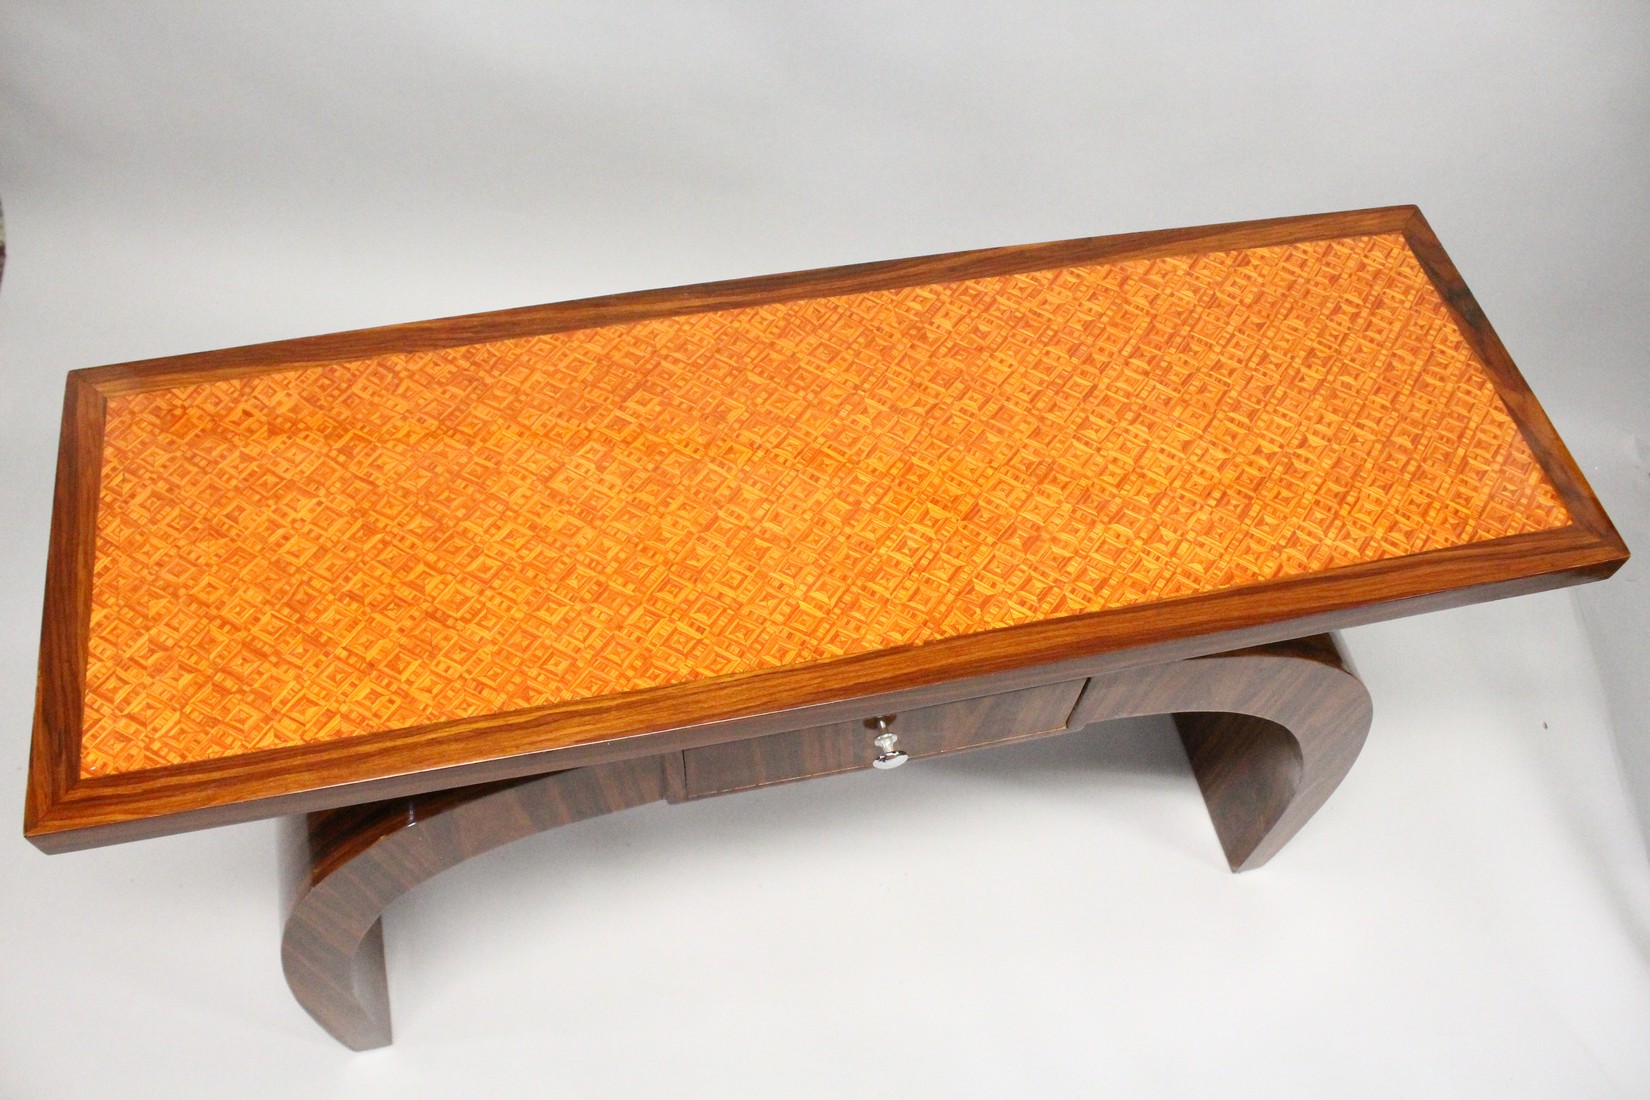 AN ART DECO STYLE ROSEWOOD CONSOLE TABLE, with a inlaid top, small drawer on curving supports 4ft - Image 2 of 2